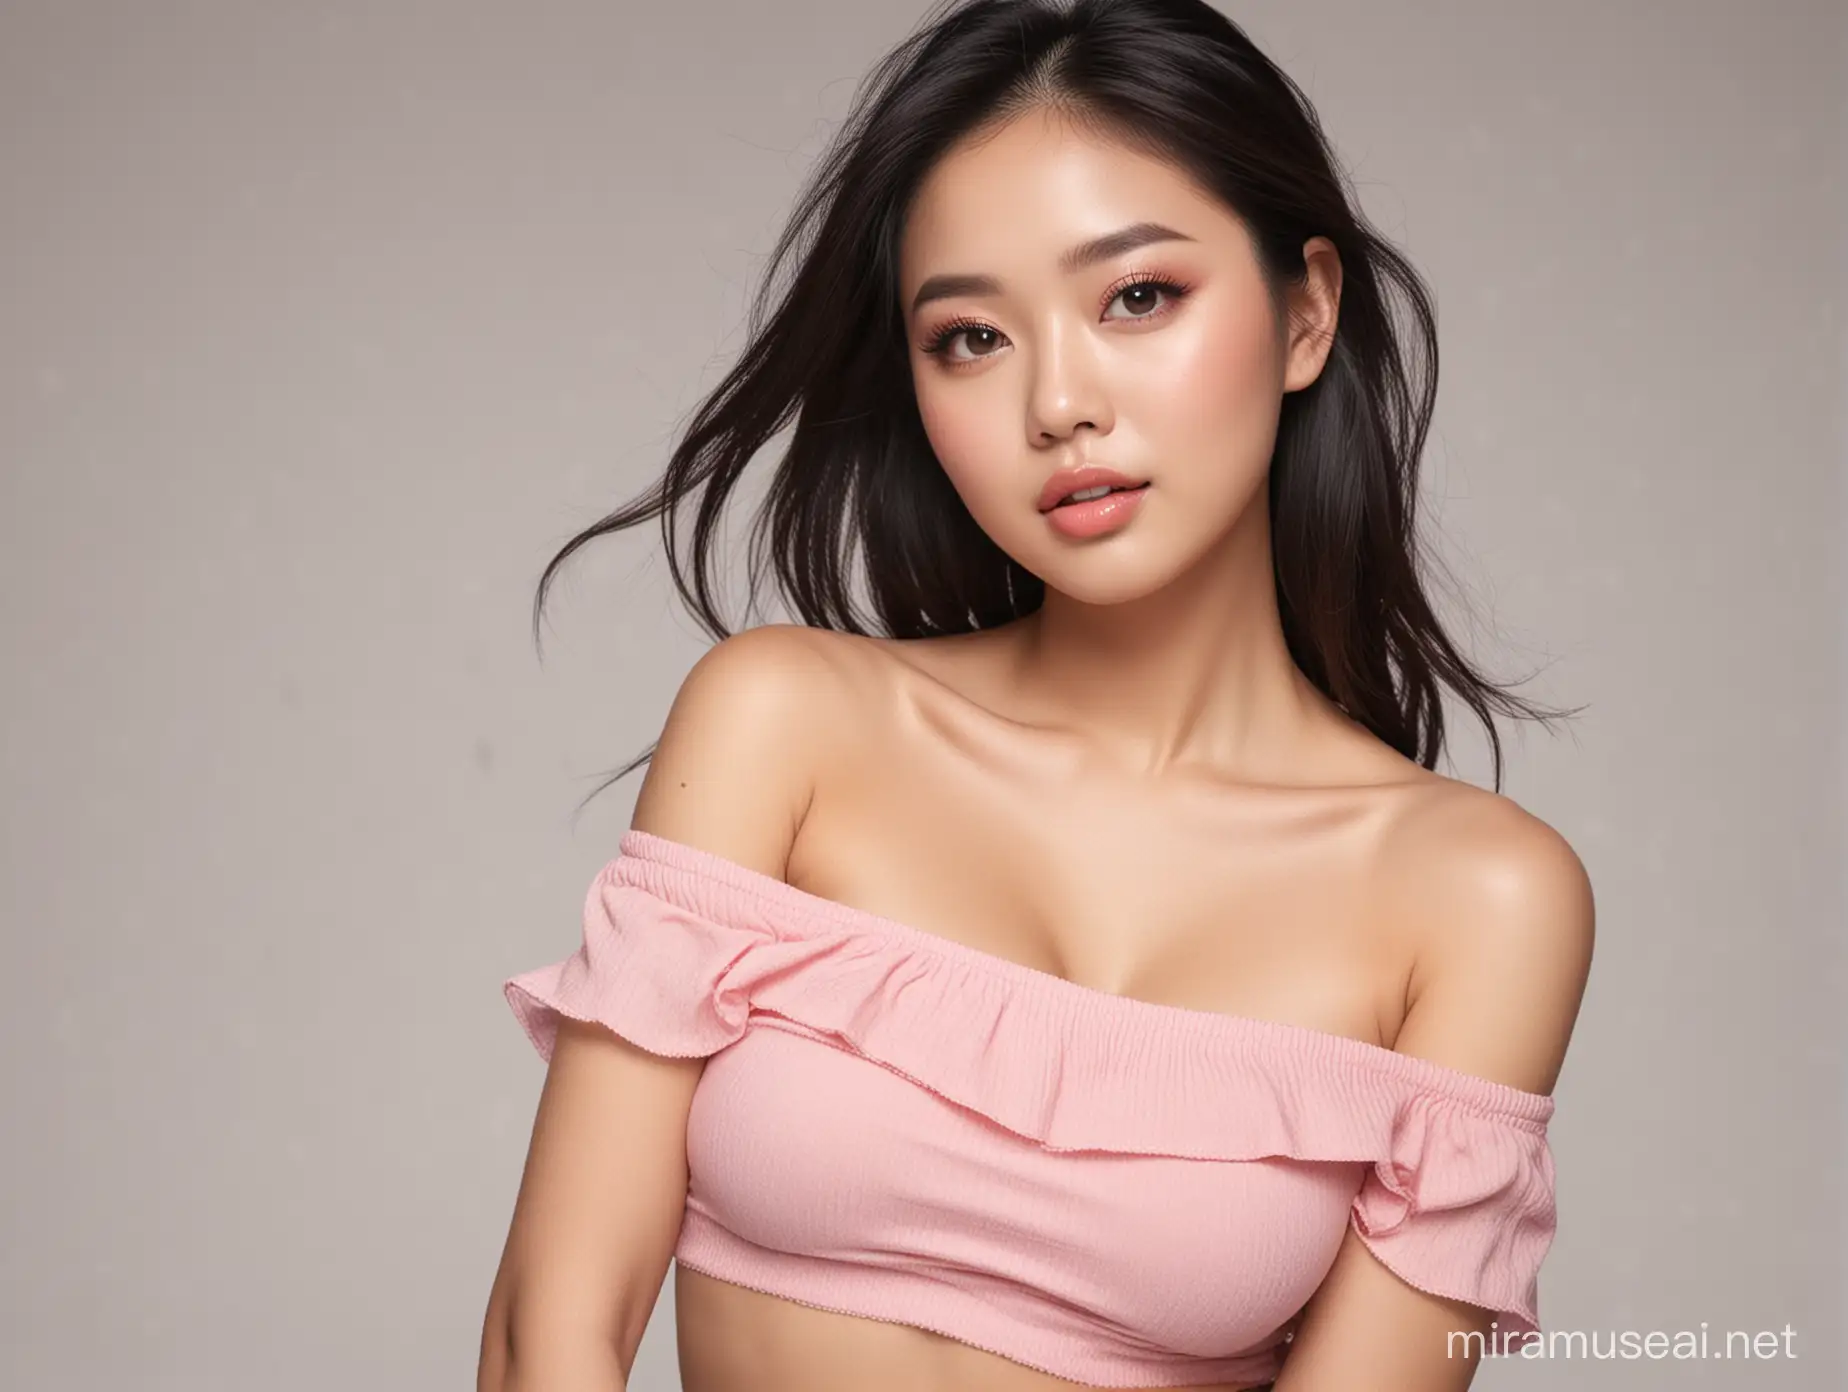 Radiant Asian Beauty with Pink Top and Sheer Stockings